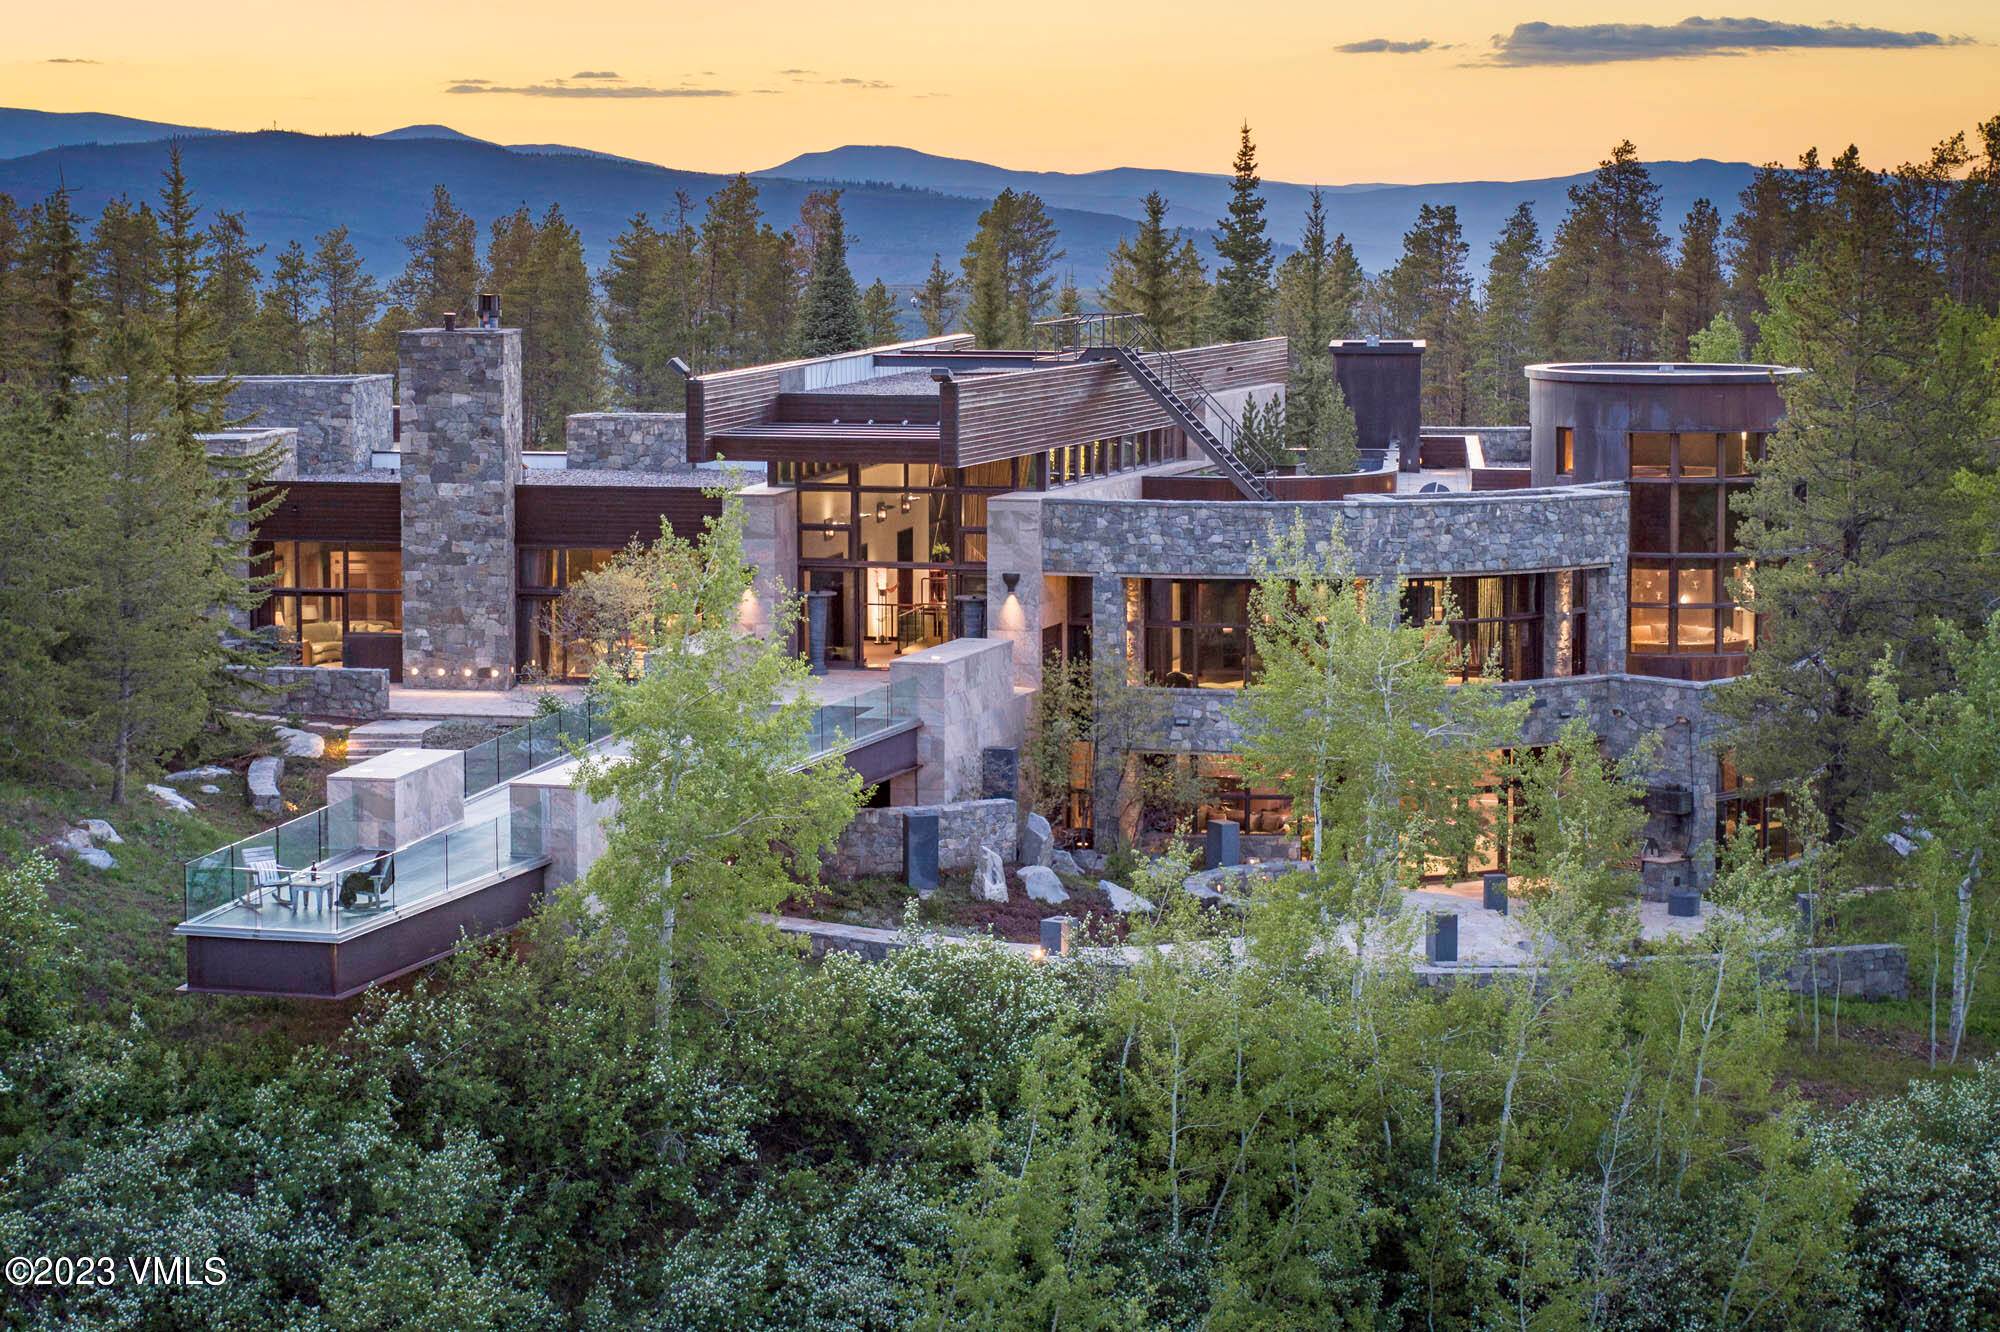 Surrounded by hundreds of open acres, bordering pristine National Forest land, this premium estate provides the ultimate ambiance and seclusion for a Rocky Mountain retreat.